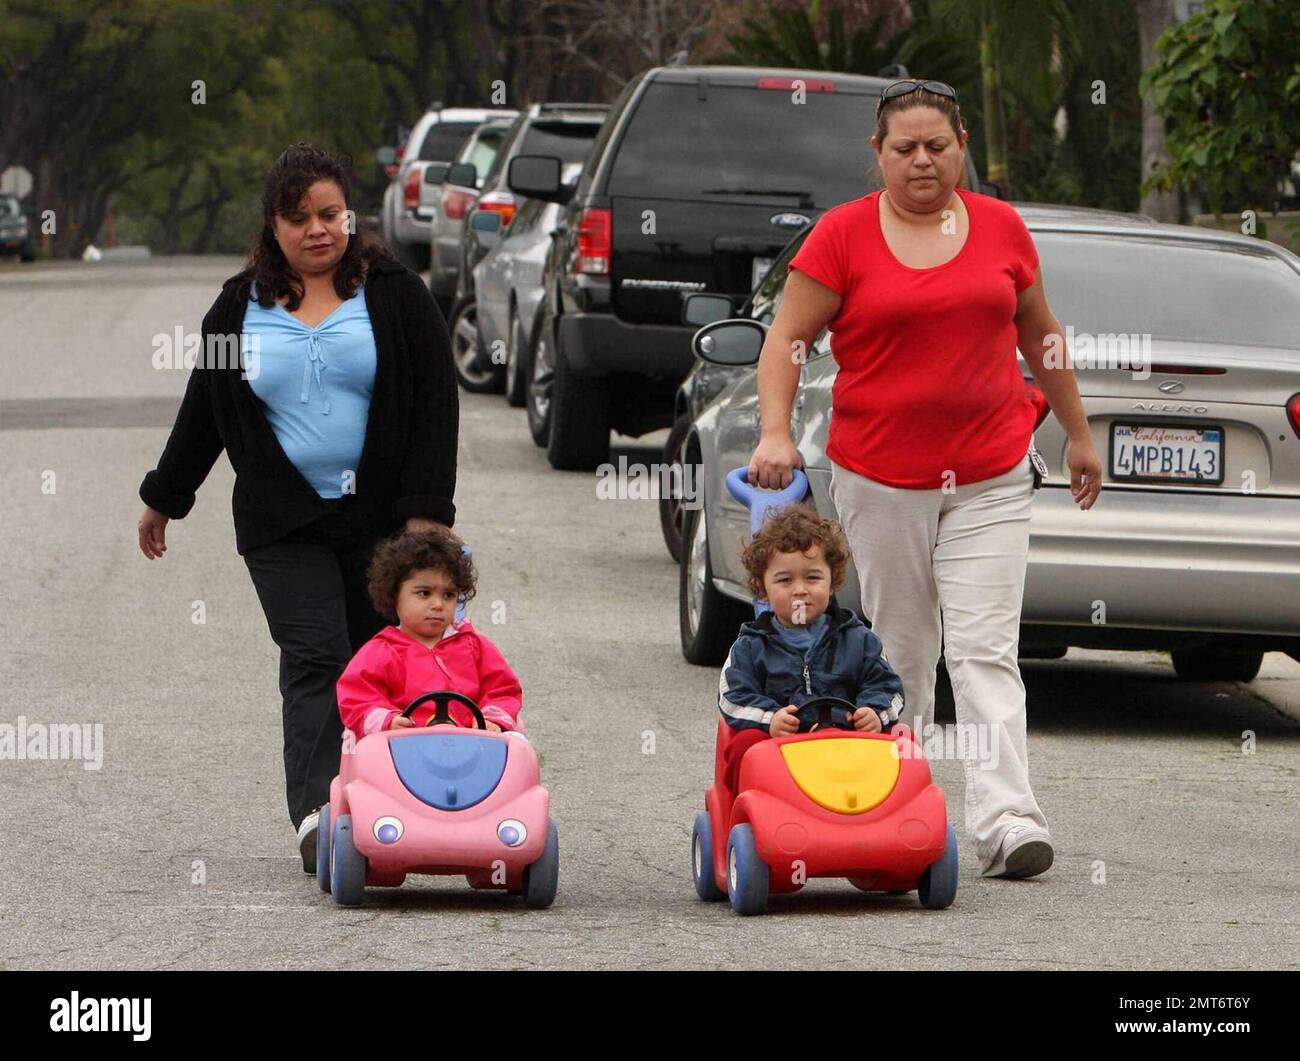 Nadya Suleman, aka Octomom, and her family start the day at home in Whittier, CA.  Nadya was seen sayng goodbye to one of her daughters as her Father, Ed Suleman, brought her out to meet the school bus.  Later in the morning the nannies were seen taking two of Nadya's fourteen children out for a morning stroll.  Nadya gave birth to octuplets on January 26, 2009.  Los Angeles, CA. 3/11/09. Stock Photo